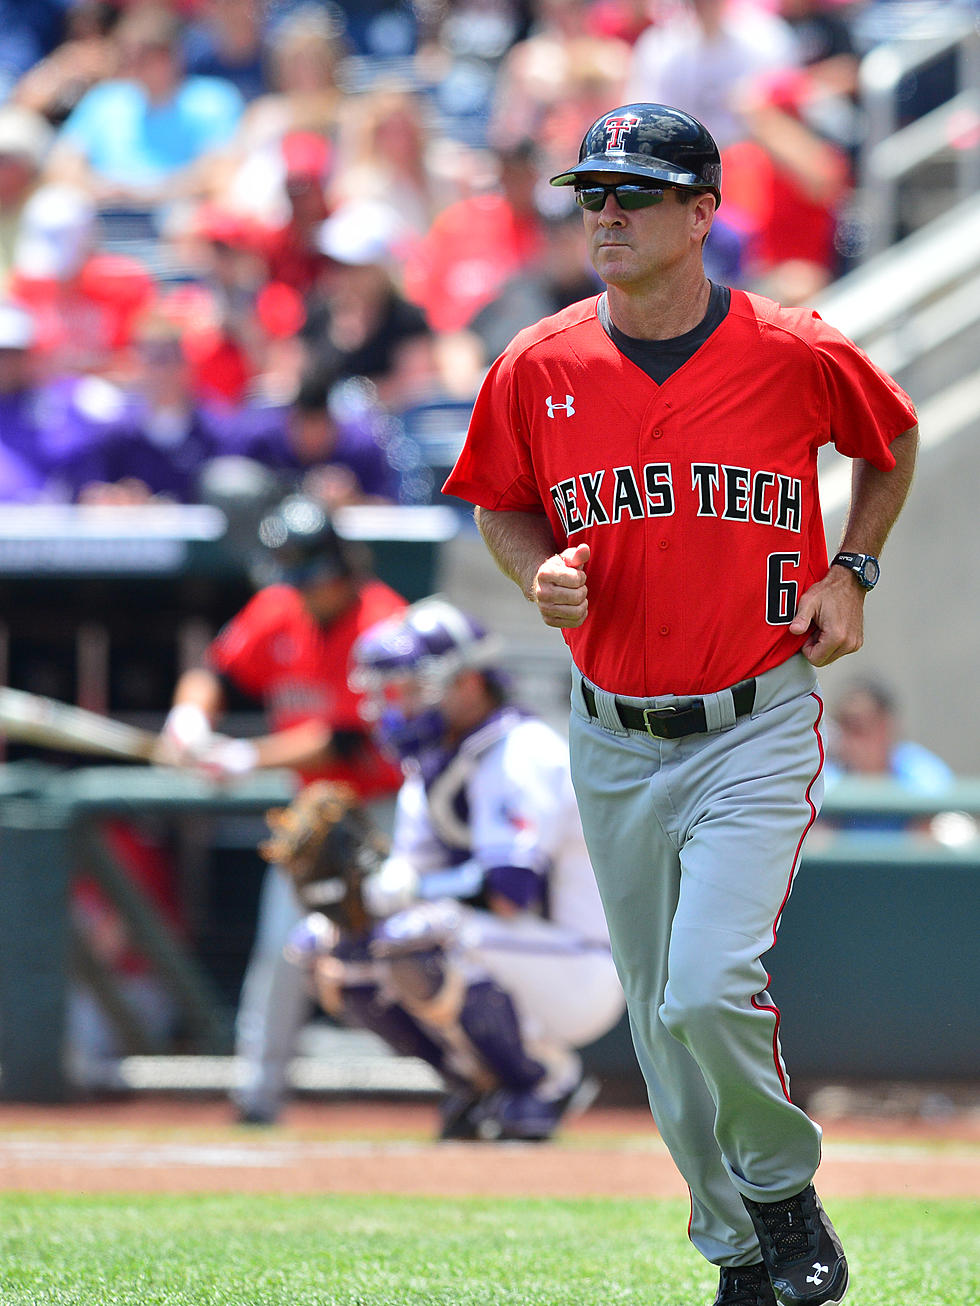 Texas Tech Baseball Opens 2016 Ranked 25th In This Poll